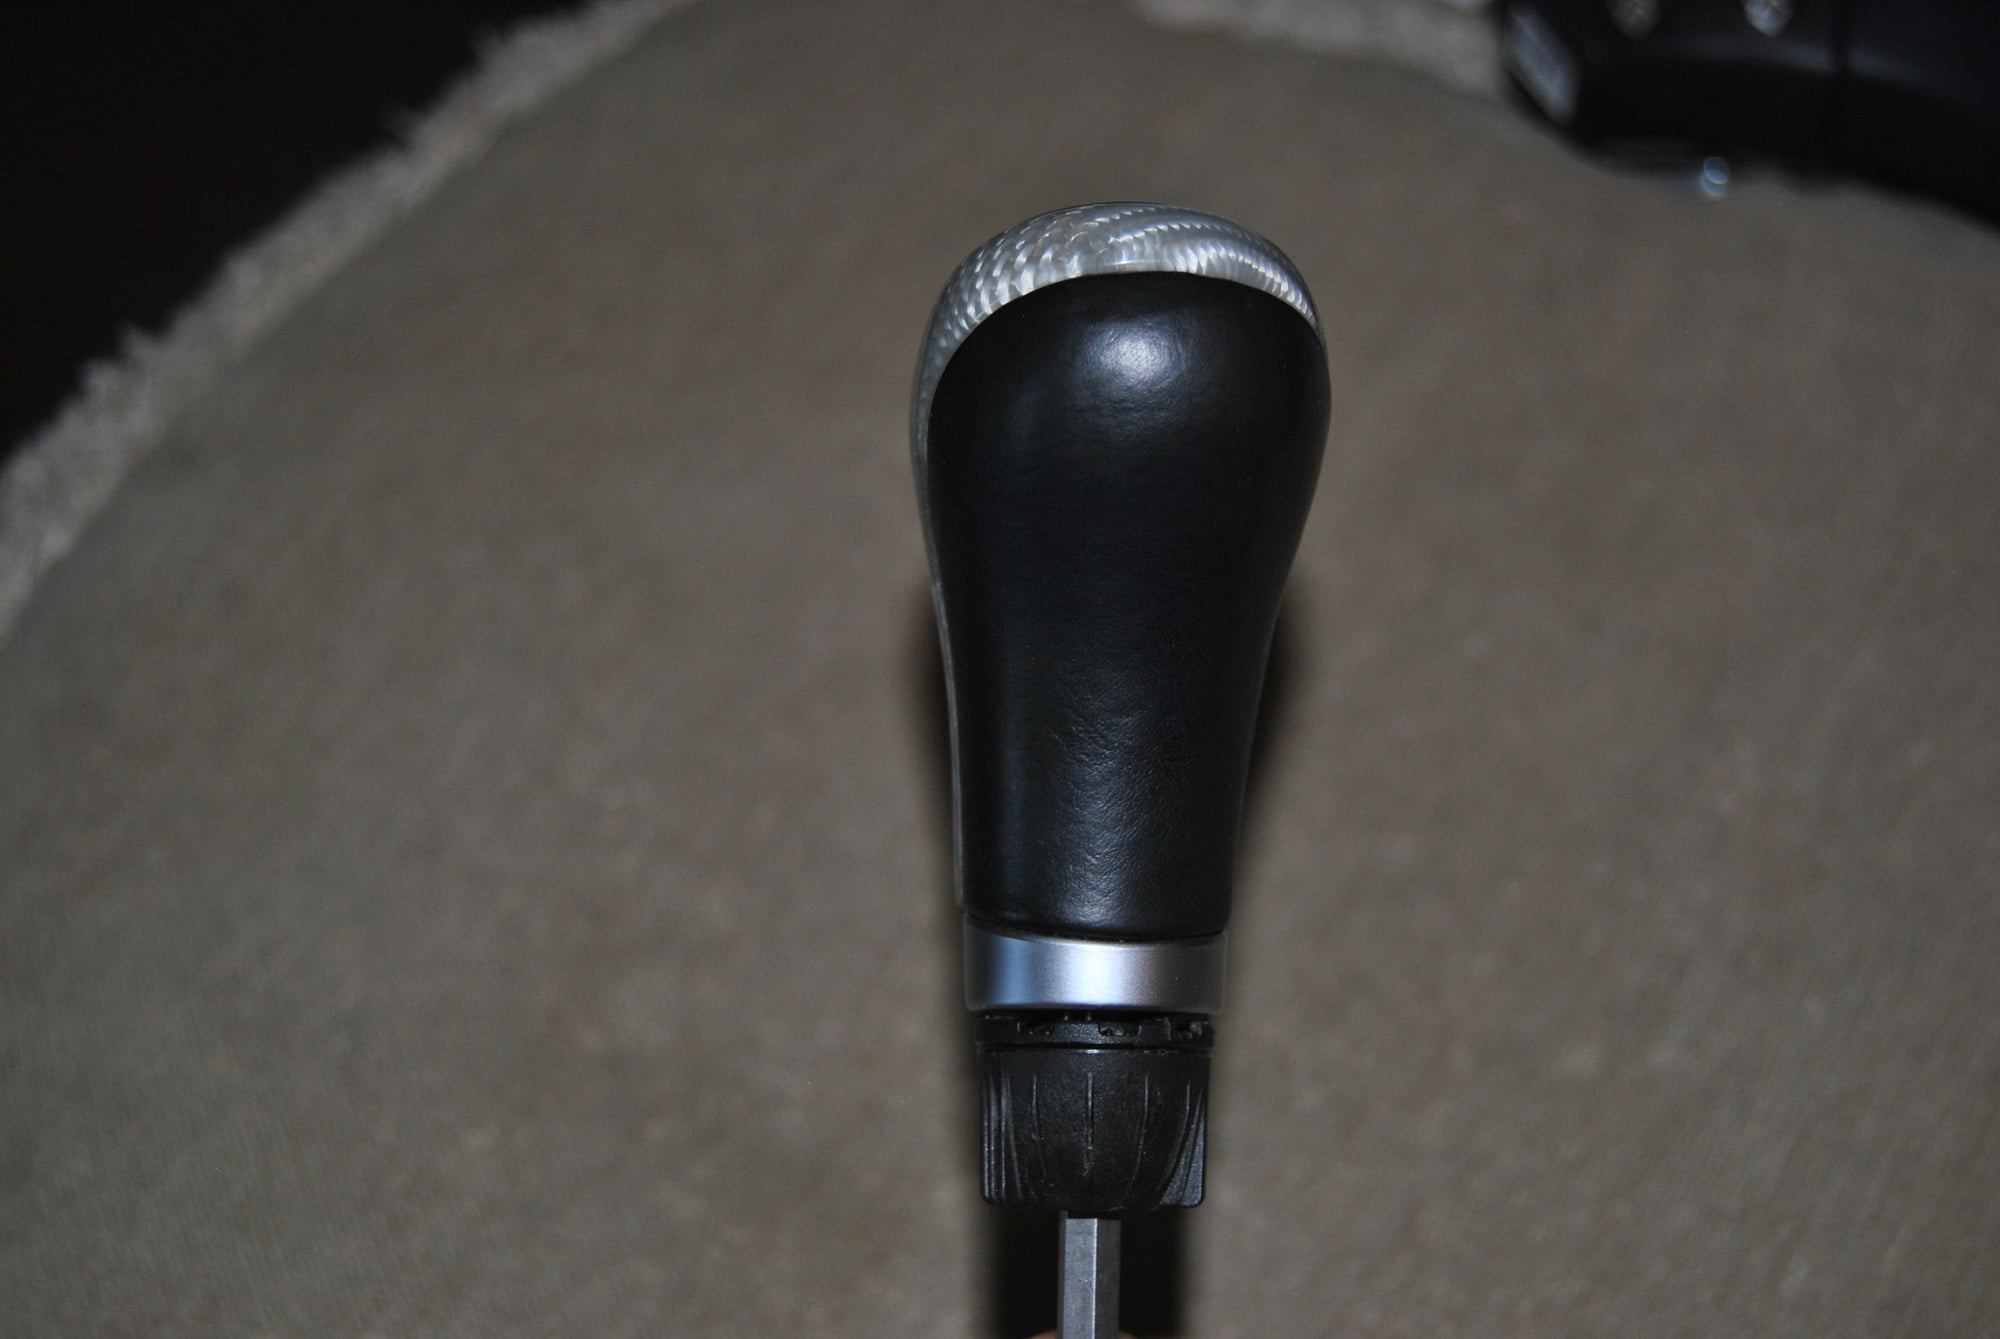 Interior/Upholstery - '01-'04 MB W203 Flat Bottom Carbon Fiber & Leather Steering Wheel/Gearshift Knob - Used - 2001 to 2004 Mercedes-Benz C240 - Upland, CA 91784, United States